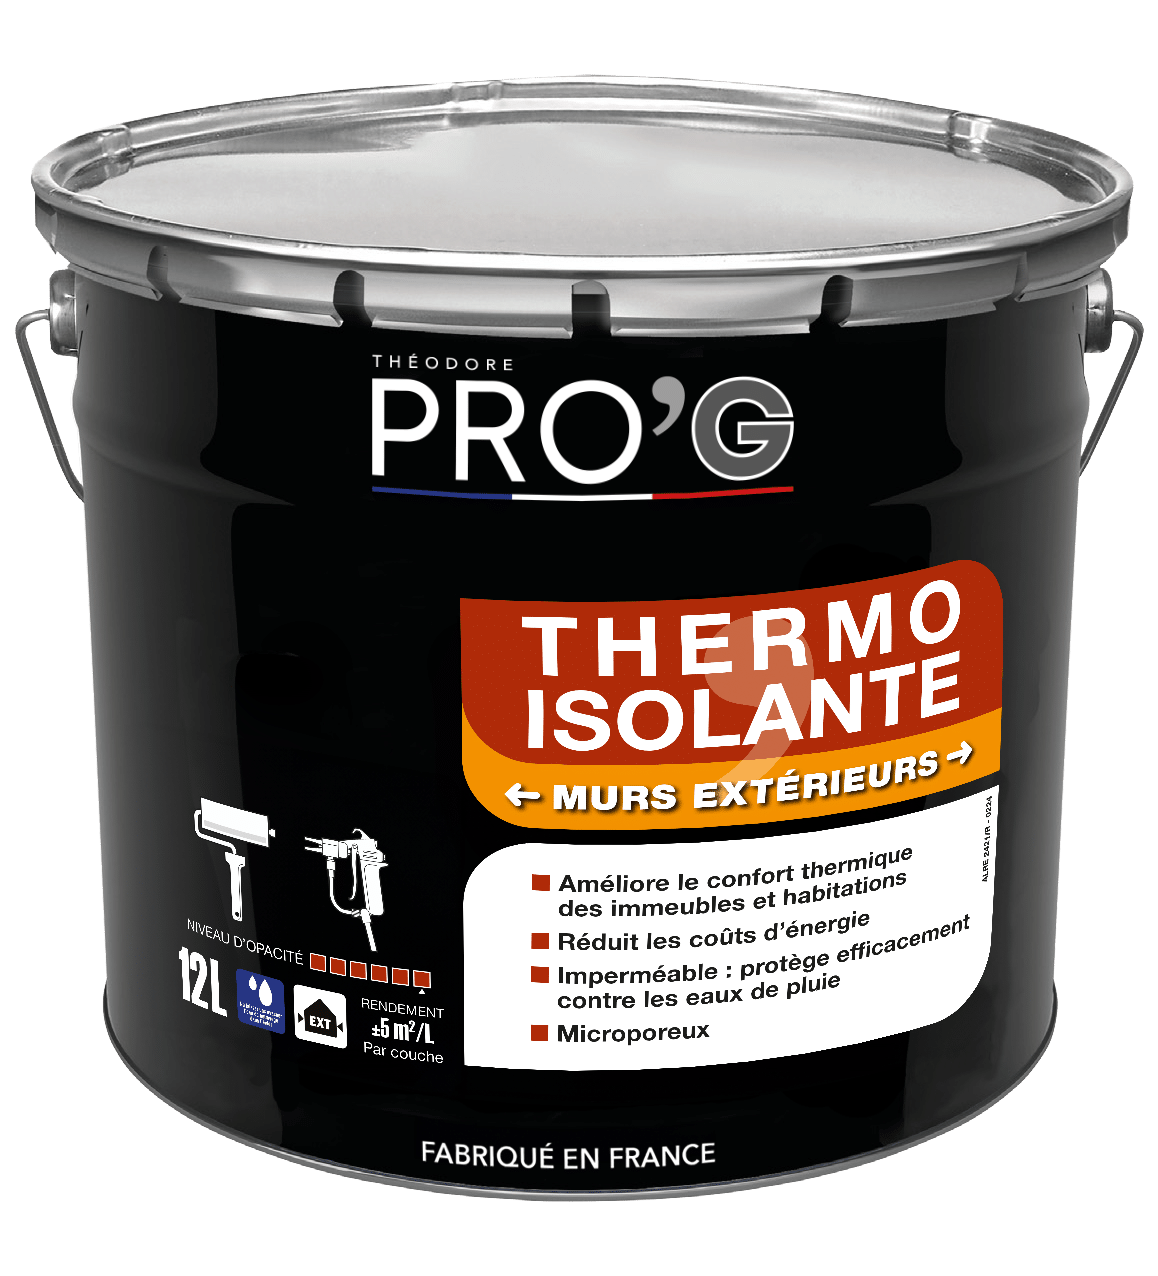 THERMO ISOLANTE MURS EXTERIEURS